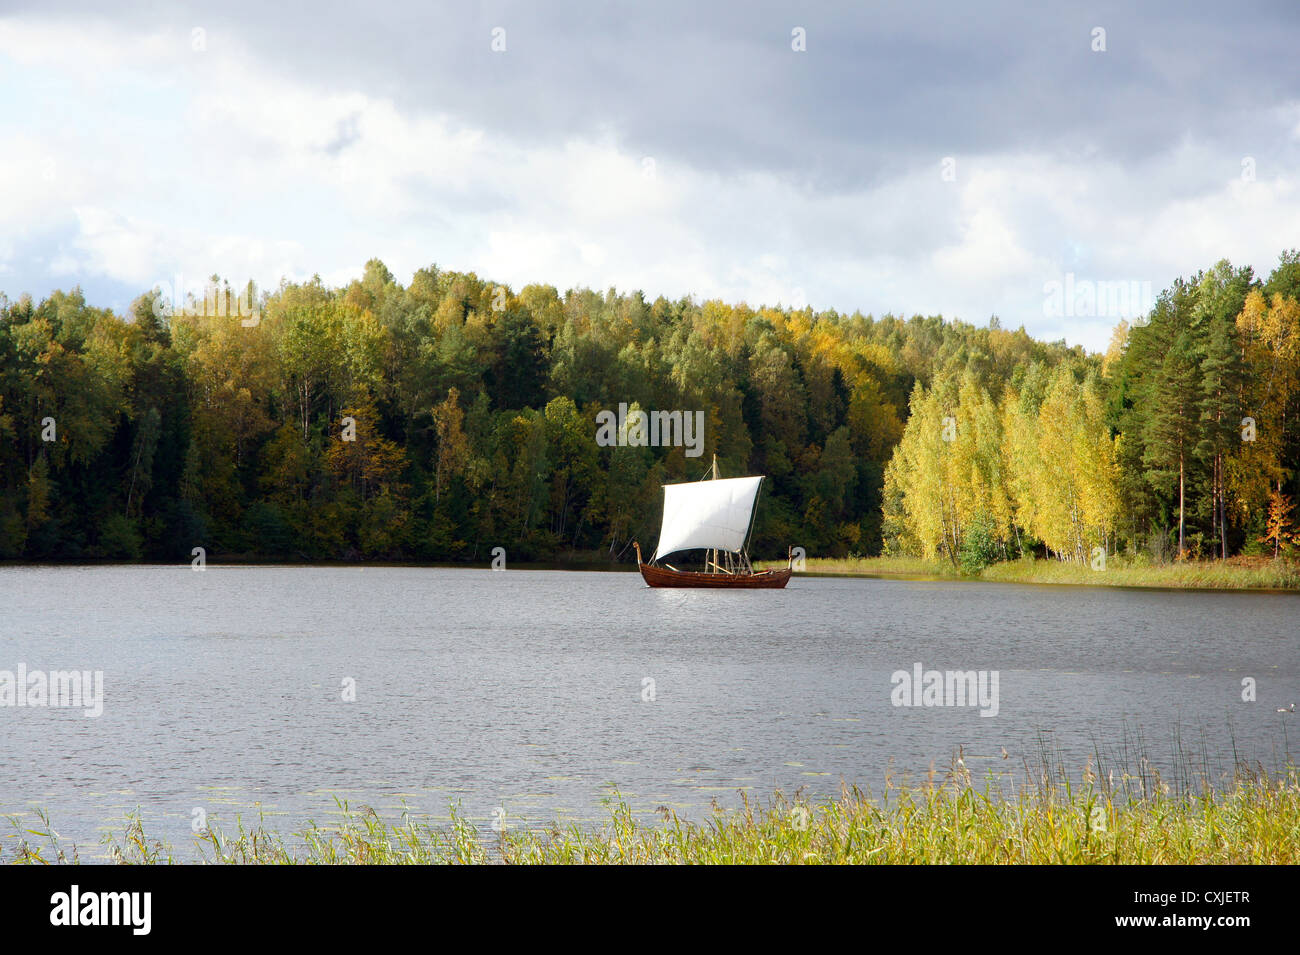 Sailing boat on a background of a forest Stock Photo